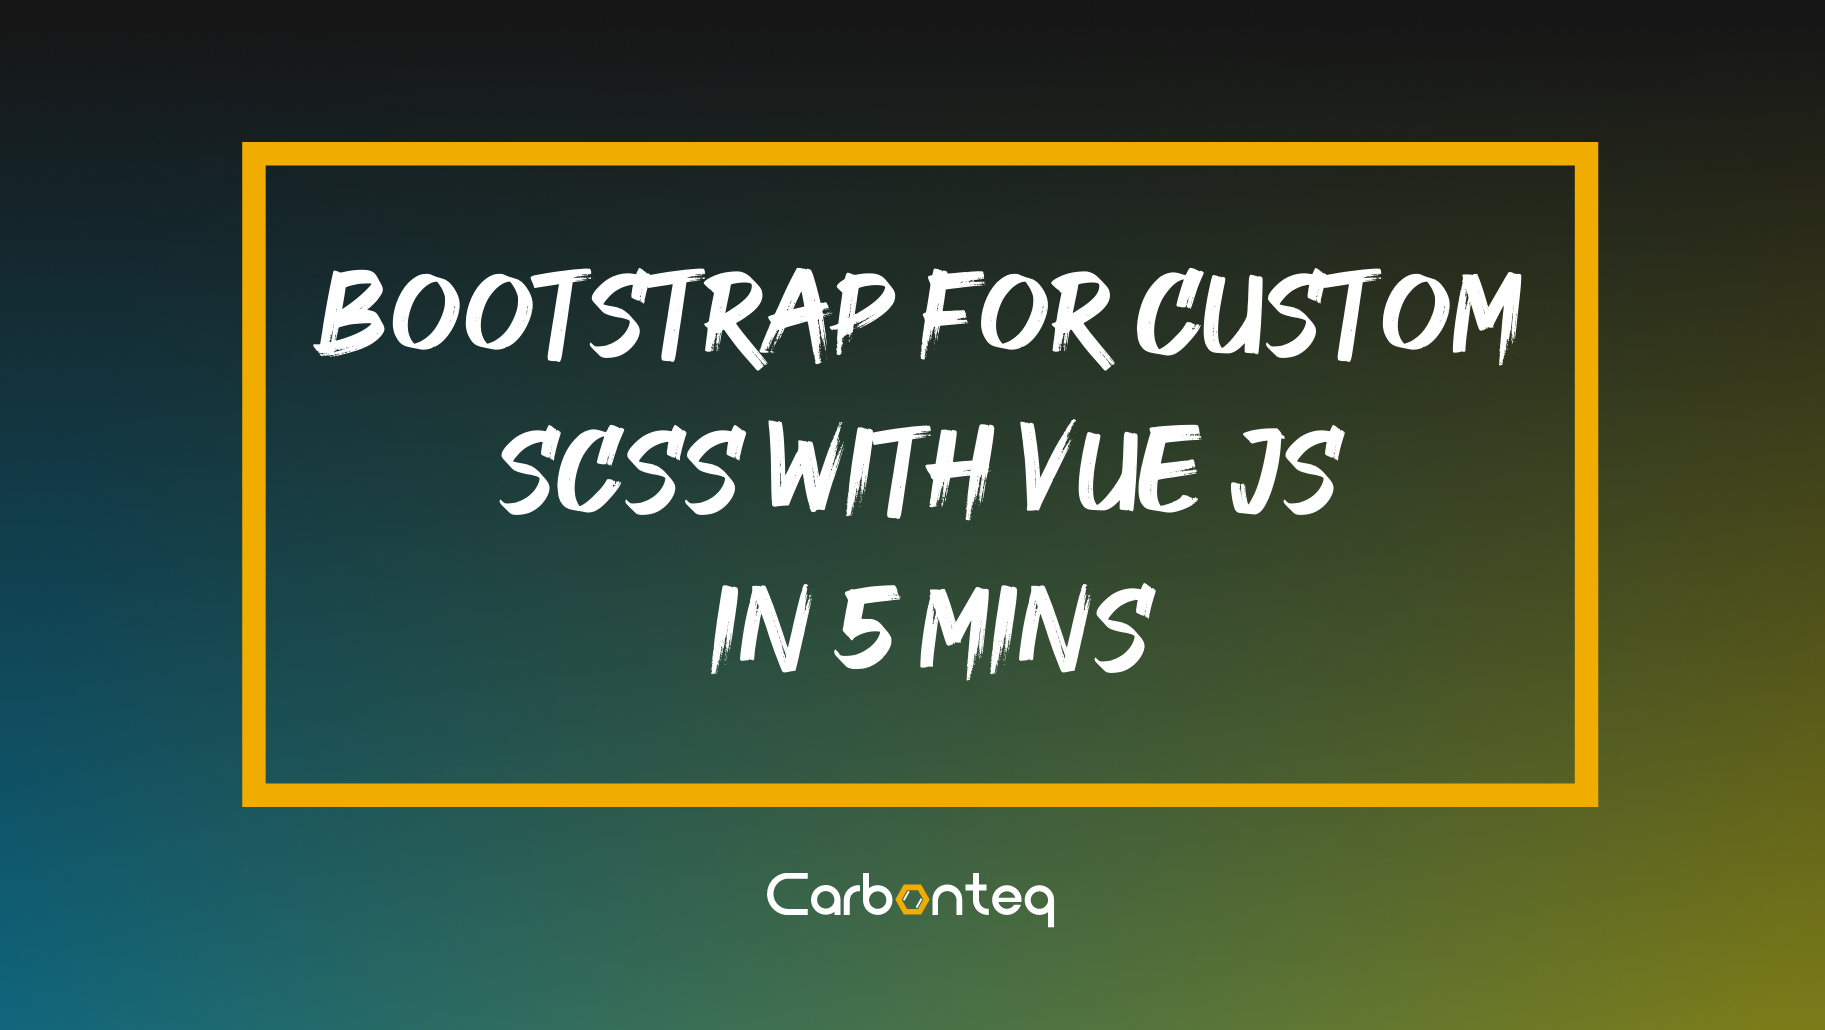 Bootstrap for Custom SCSS with Vue JS, in 5 mins